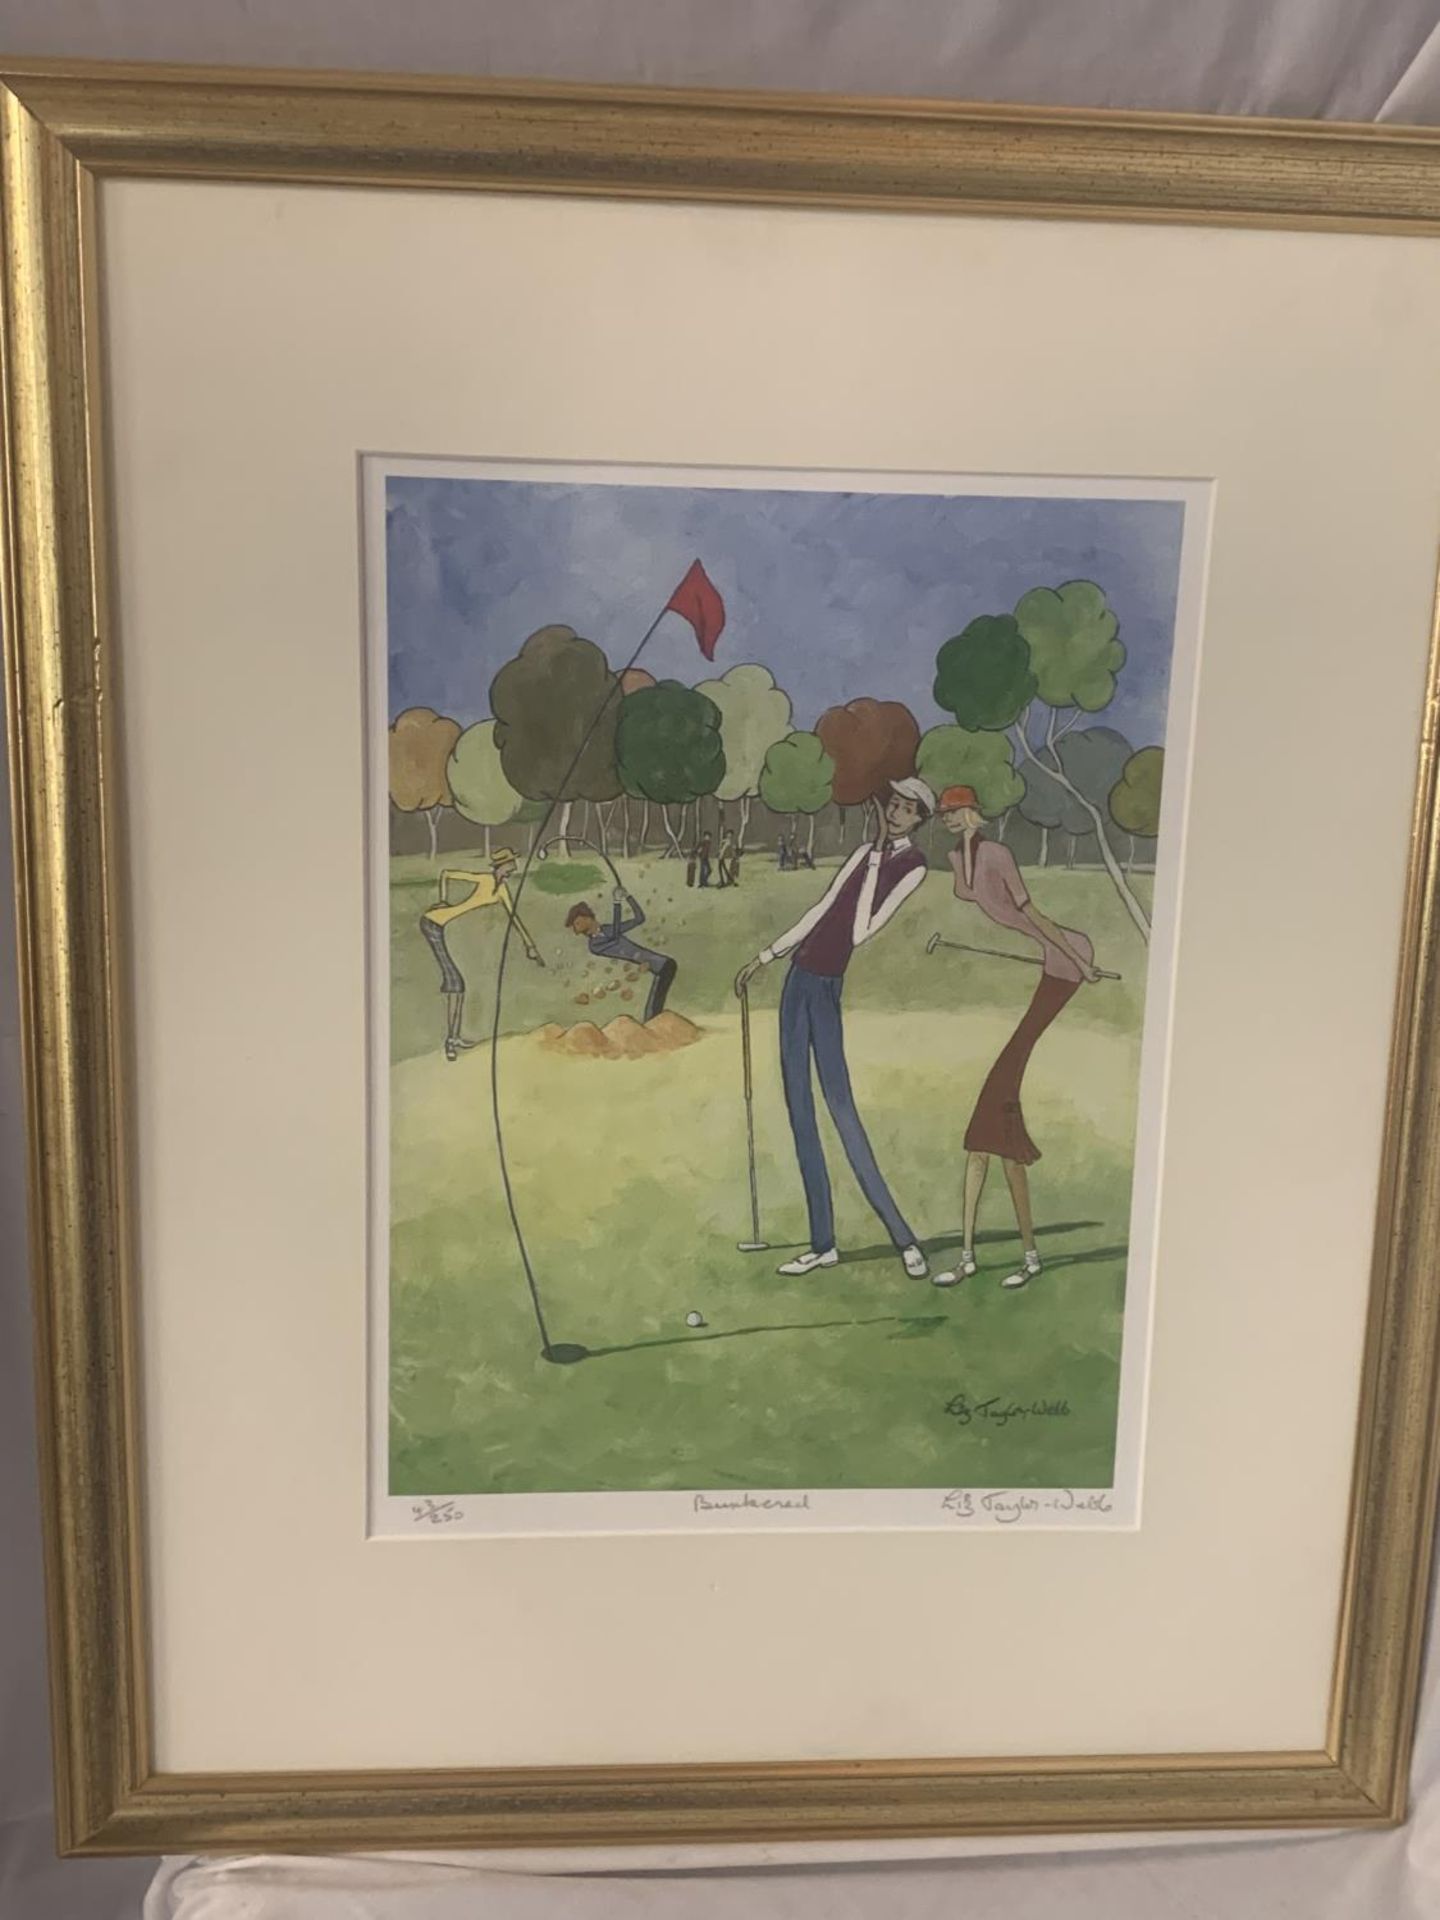 A GILT FRAMED LIMITED EDITION LIZ TAYLOR WEBB PICTURE 'BUNKERED' PENCIL SIGNED TO LOWER RIGHT HAND